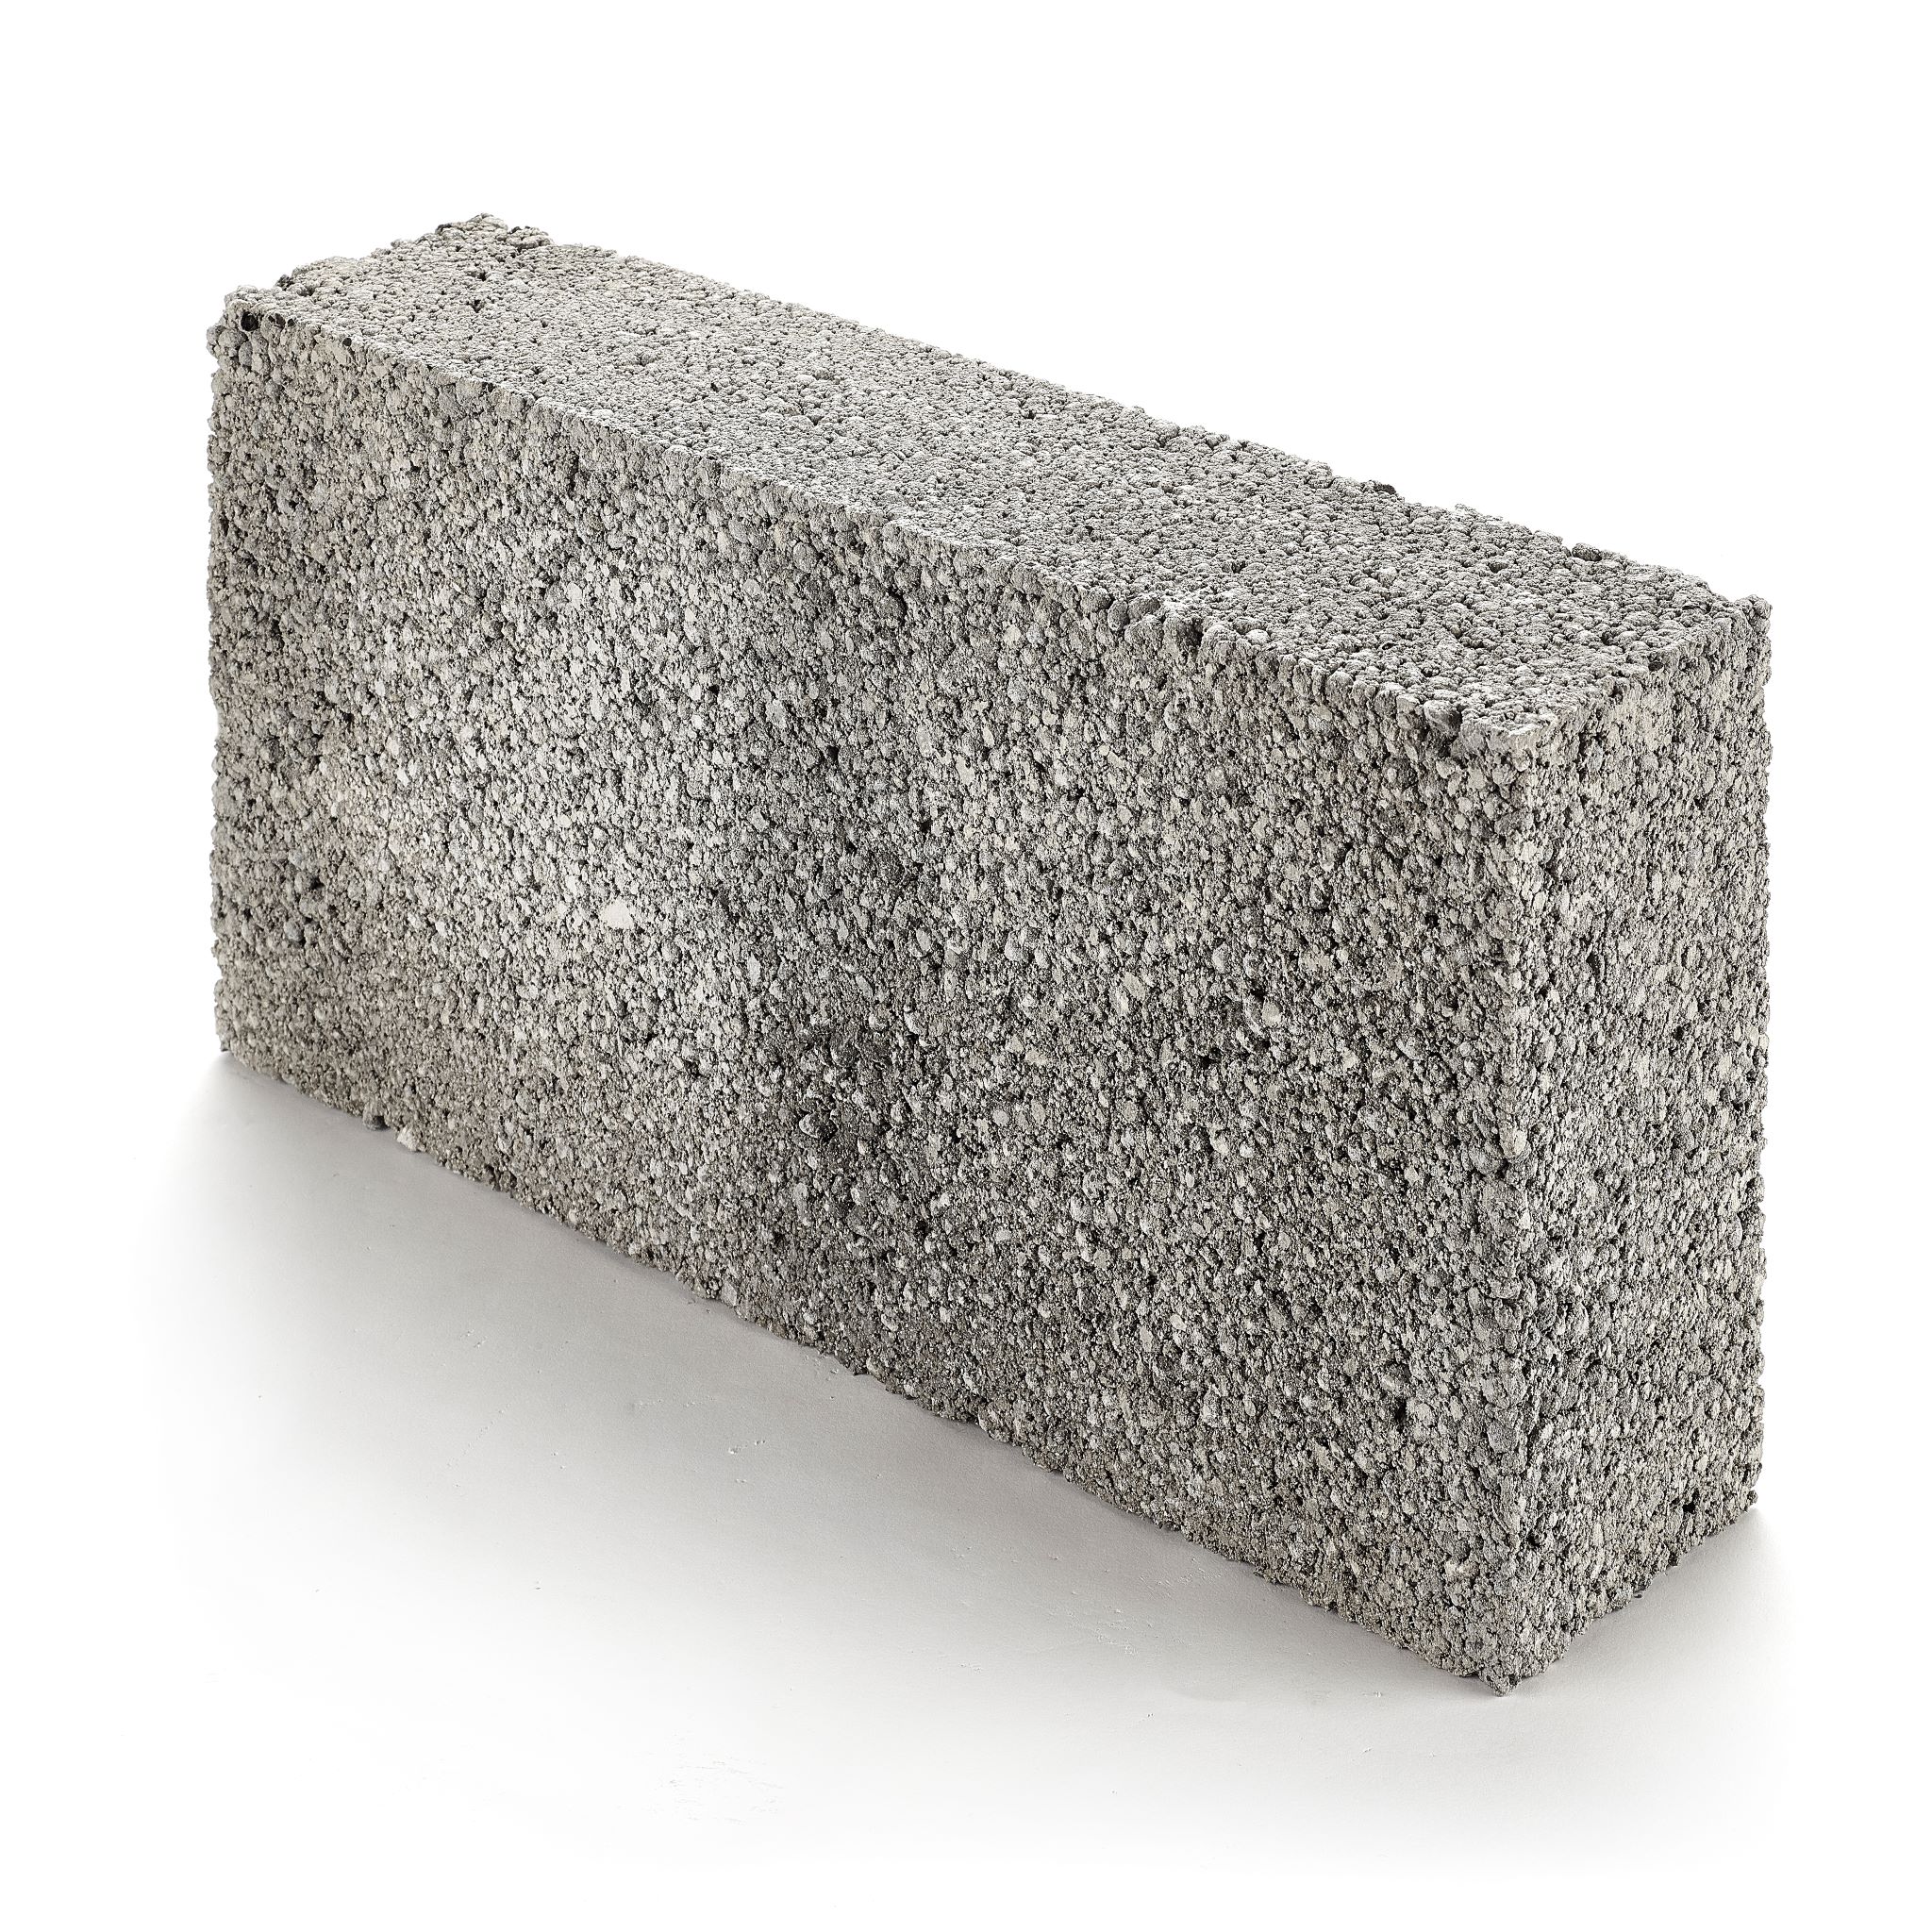 What Exactly Is Lightweight Concrete?